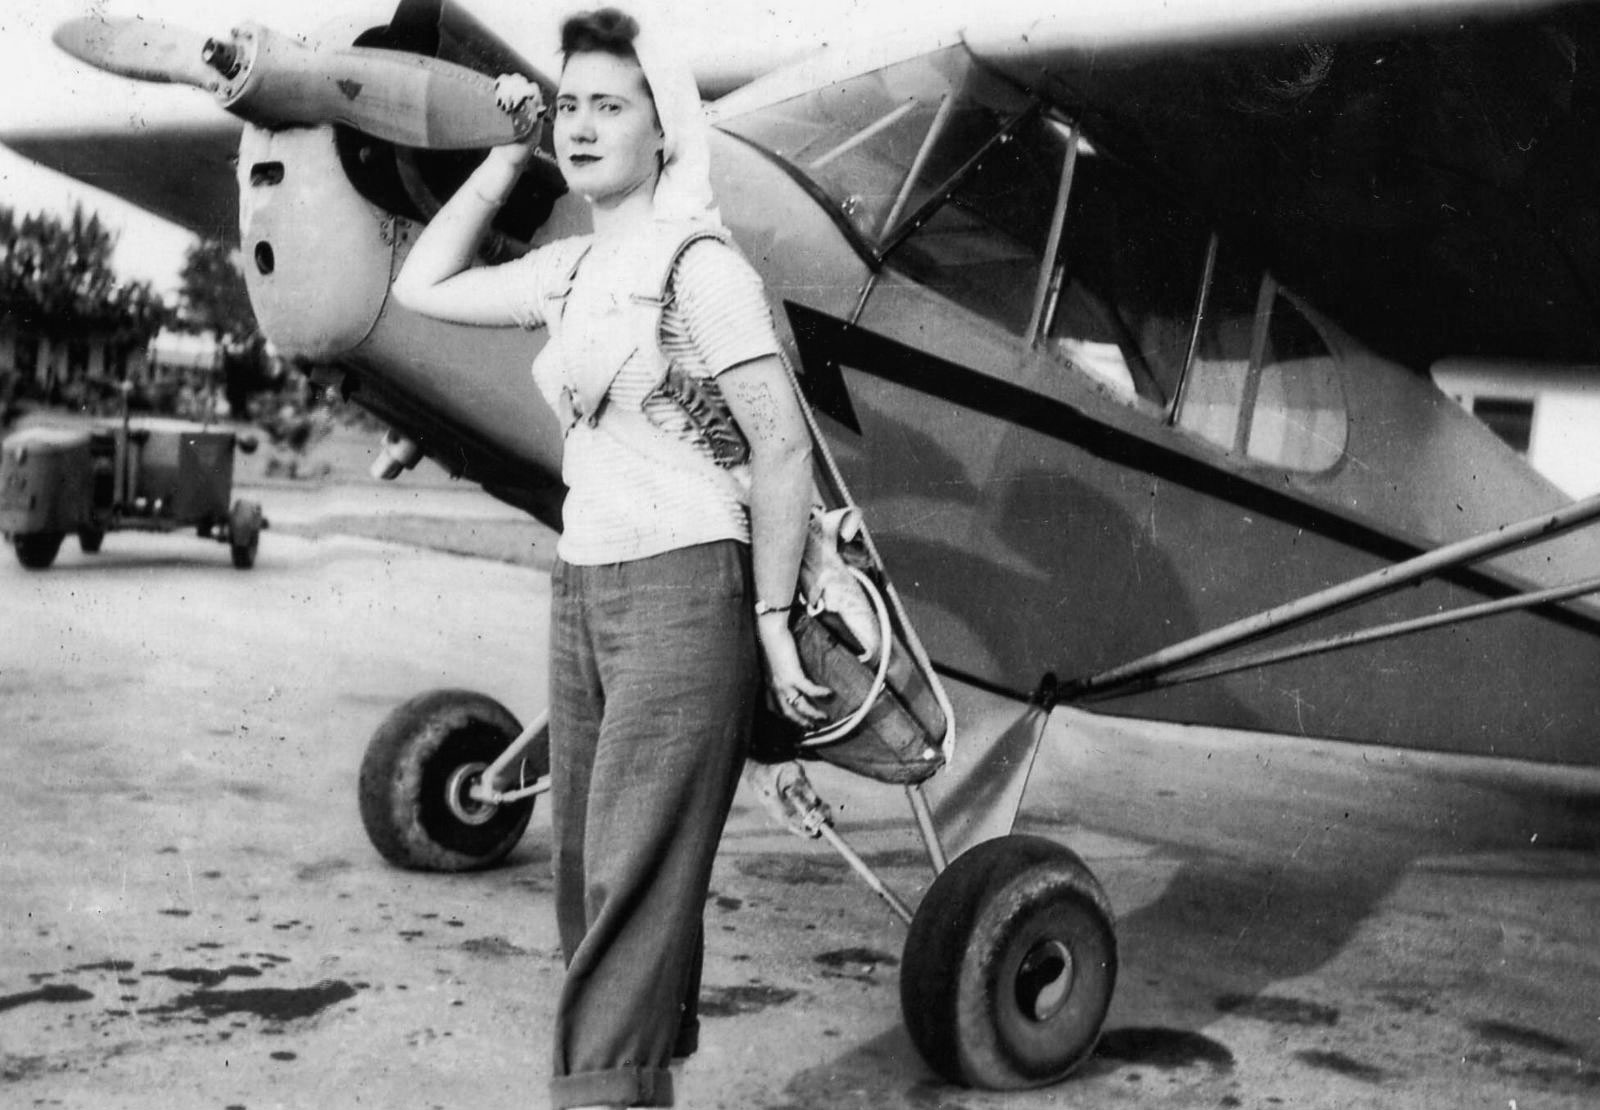 This is my grandmother in WASP training in Texas.  I think it was around 1943.  She passed away a couple of weeks ago at 88 years.  She kept that adventurous spirit until the end. View full size.